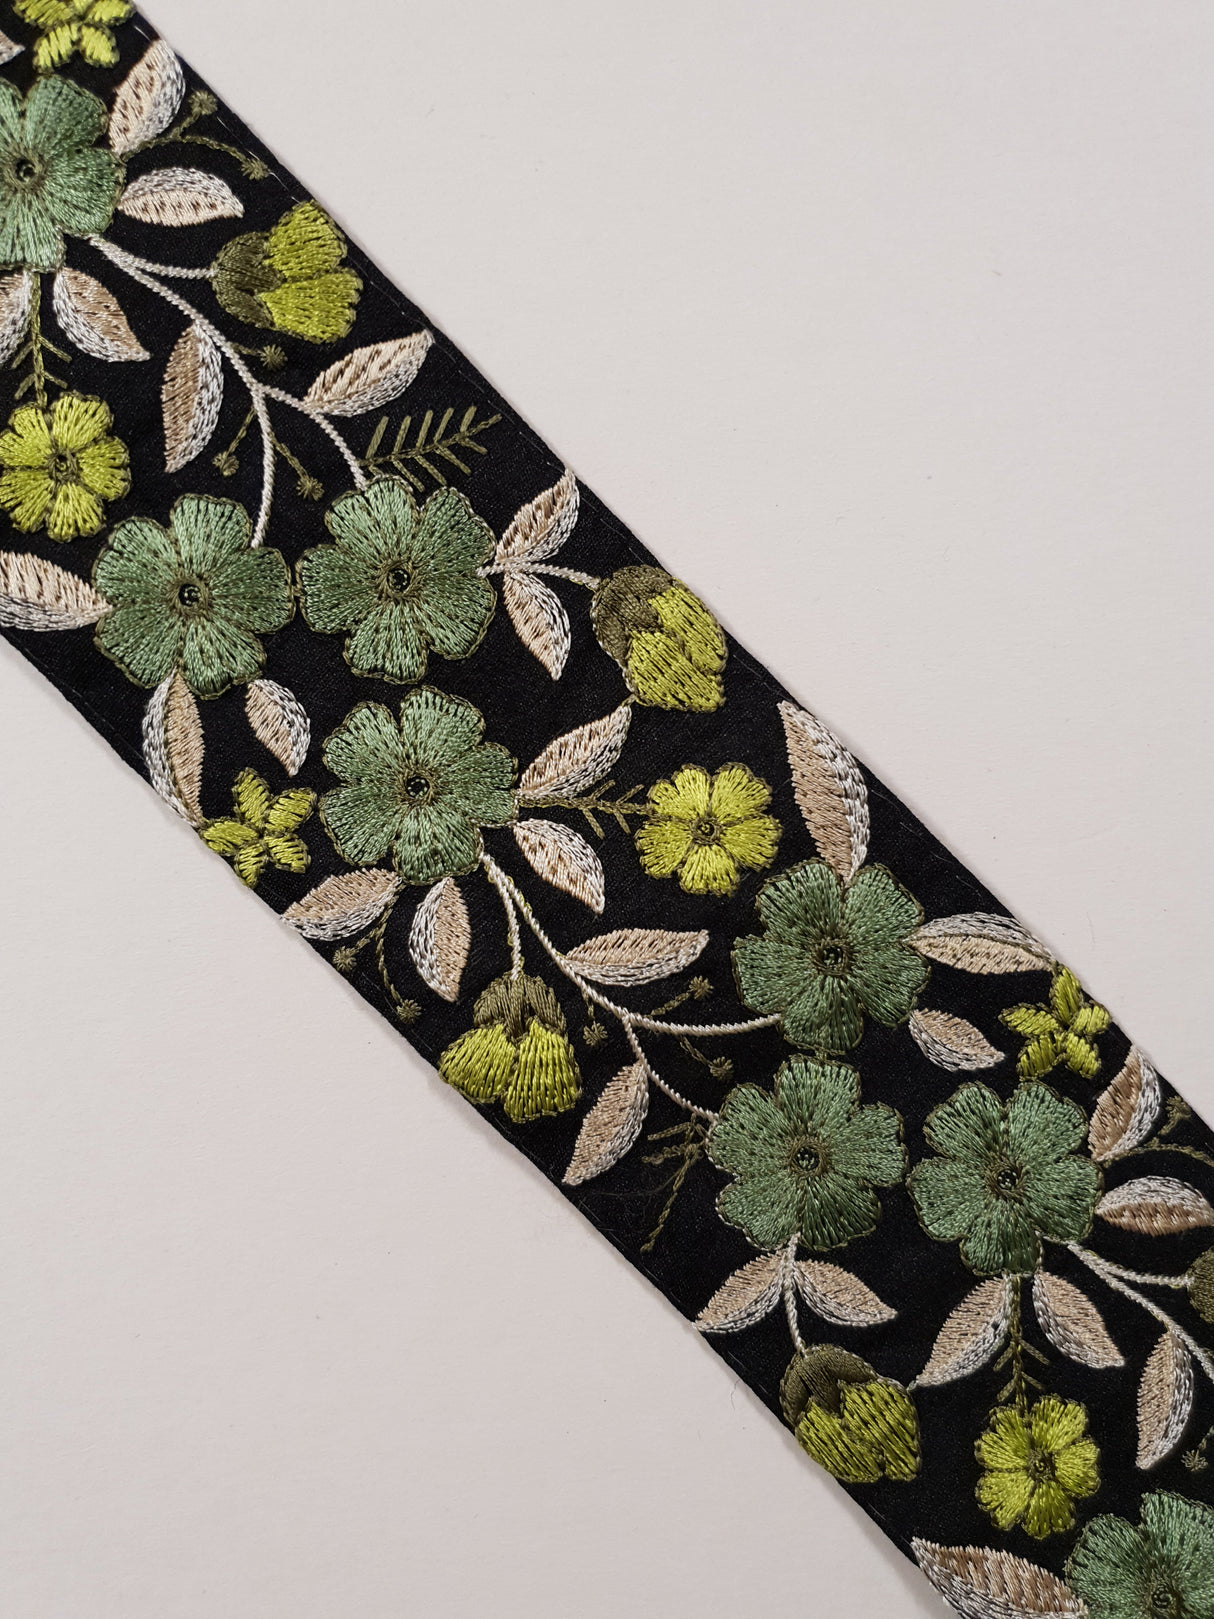 Embroidered Trim - 1 Meter - (ITR-1382)